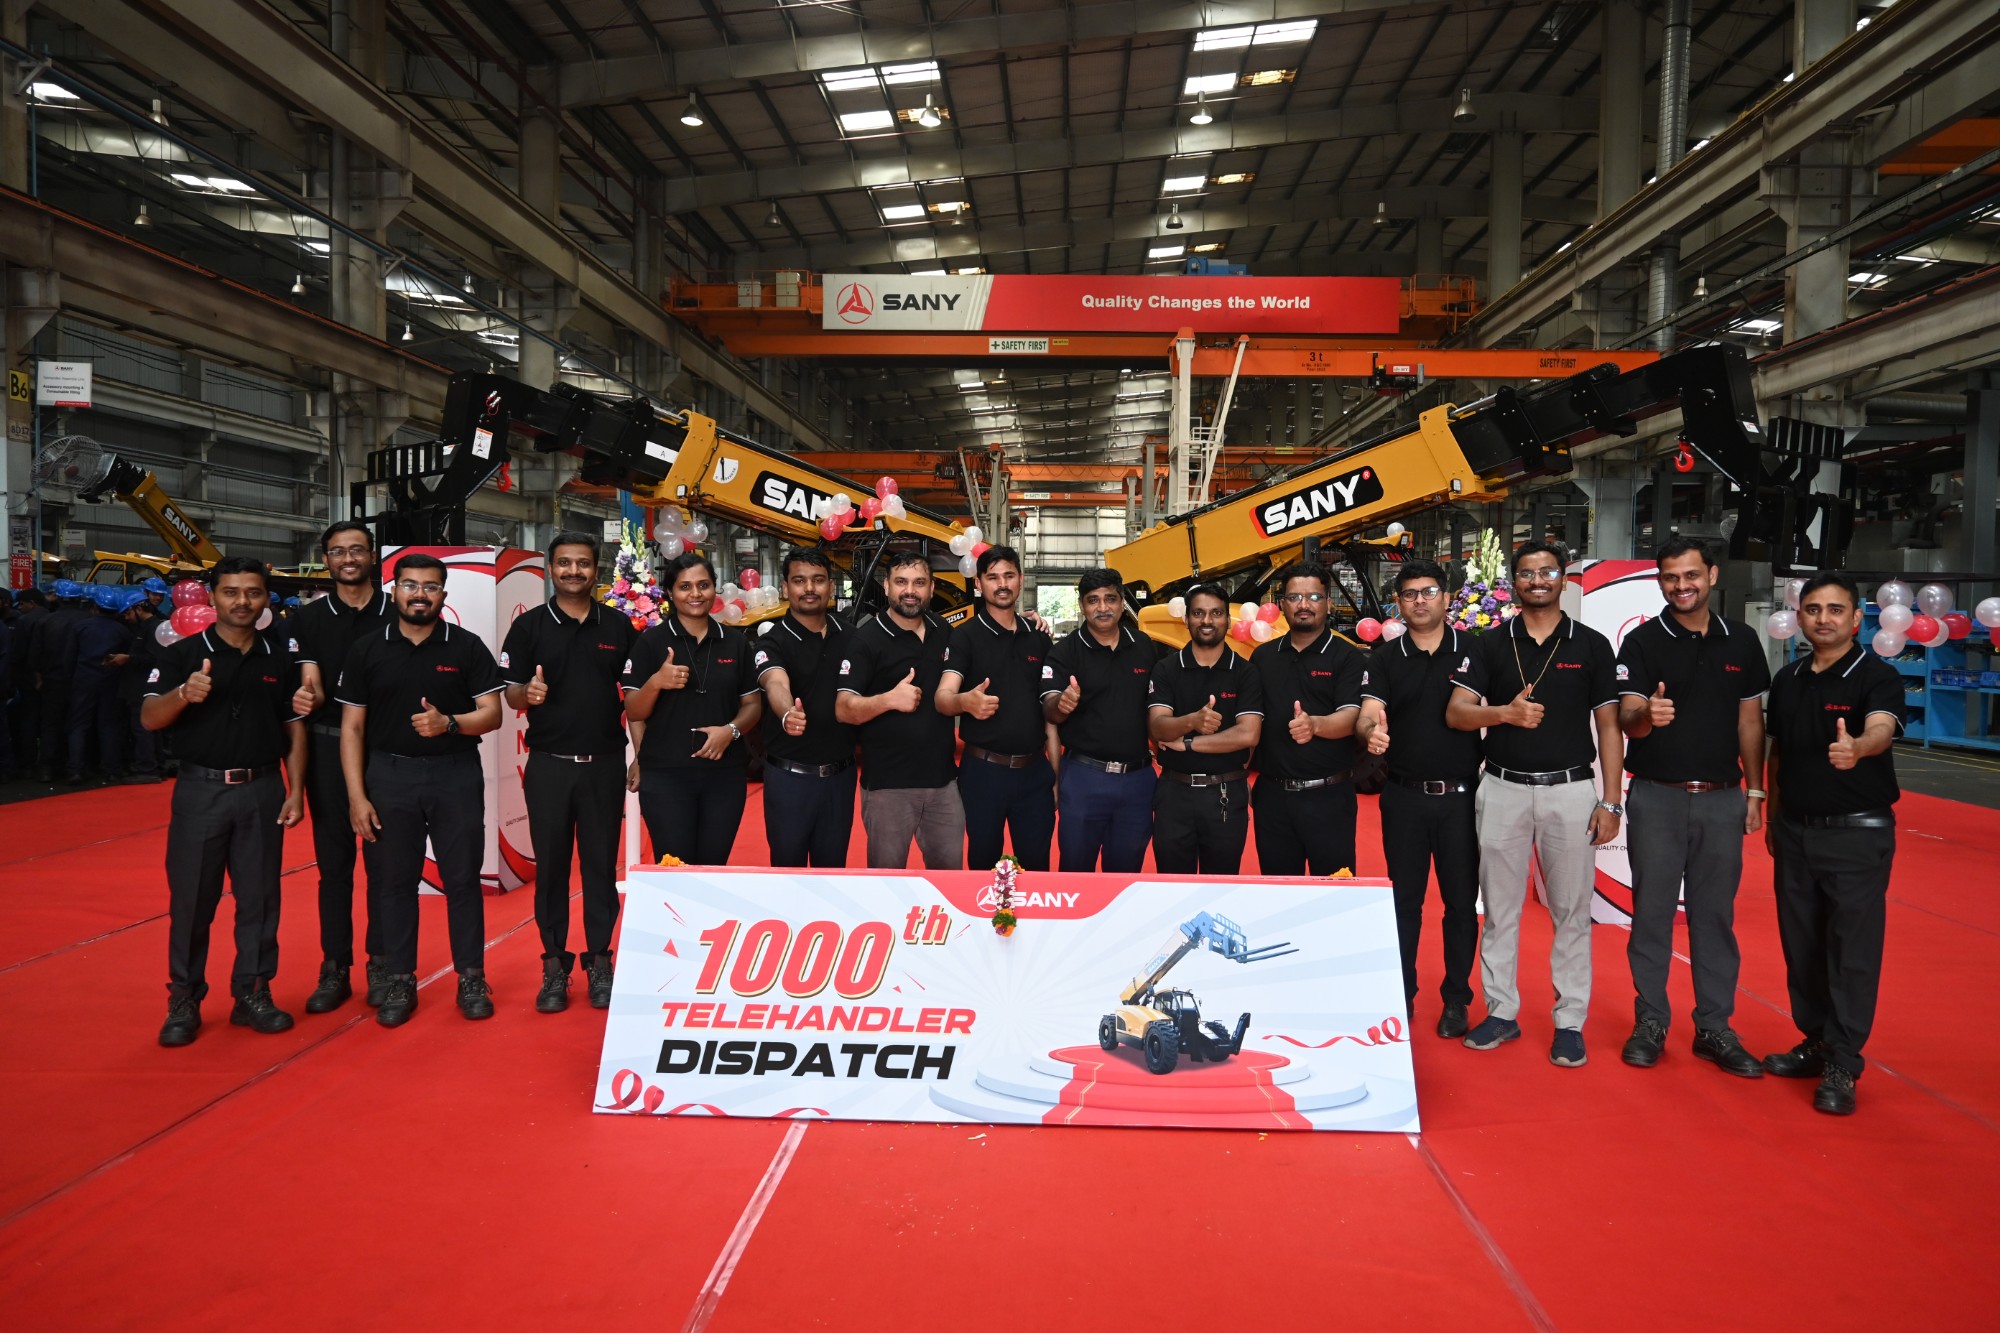 SANY achieves a milestone of exporting 1,000 Telehandlers